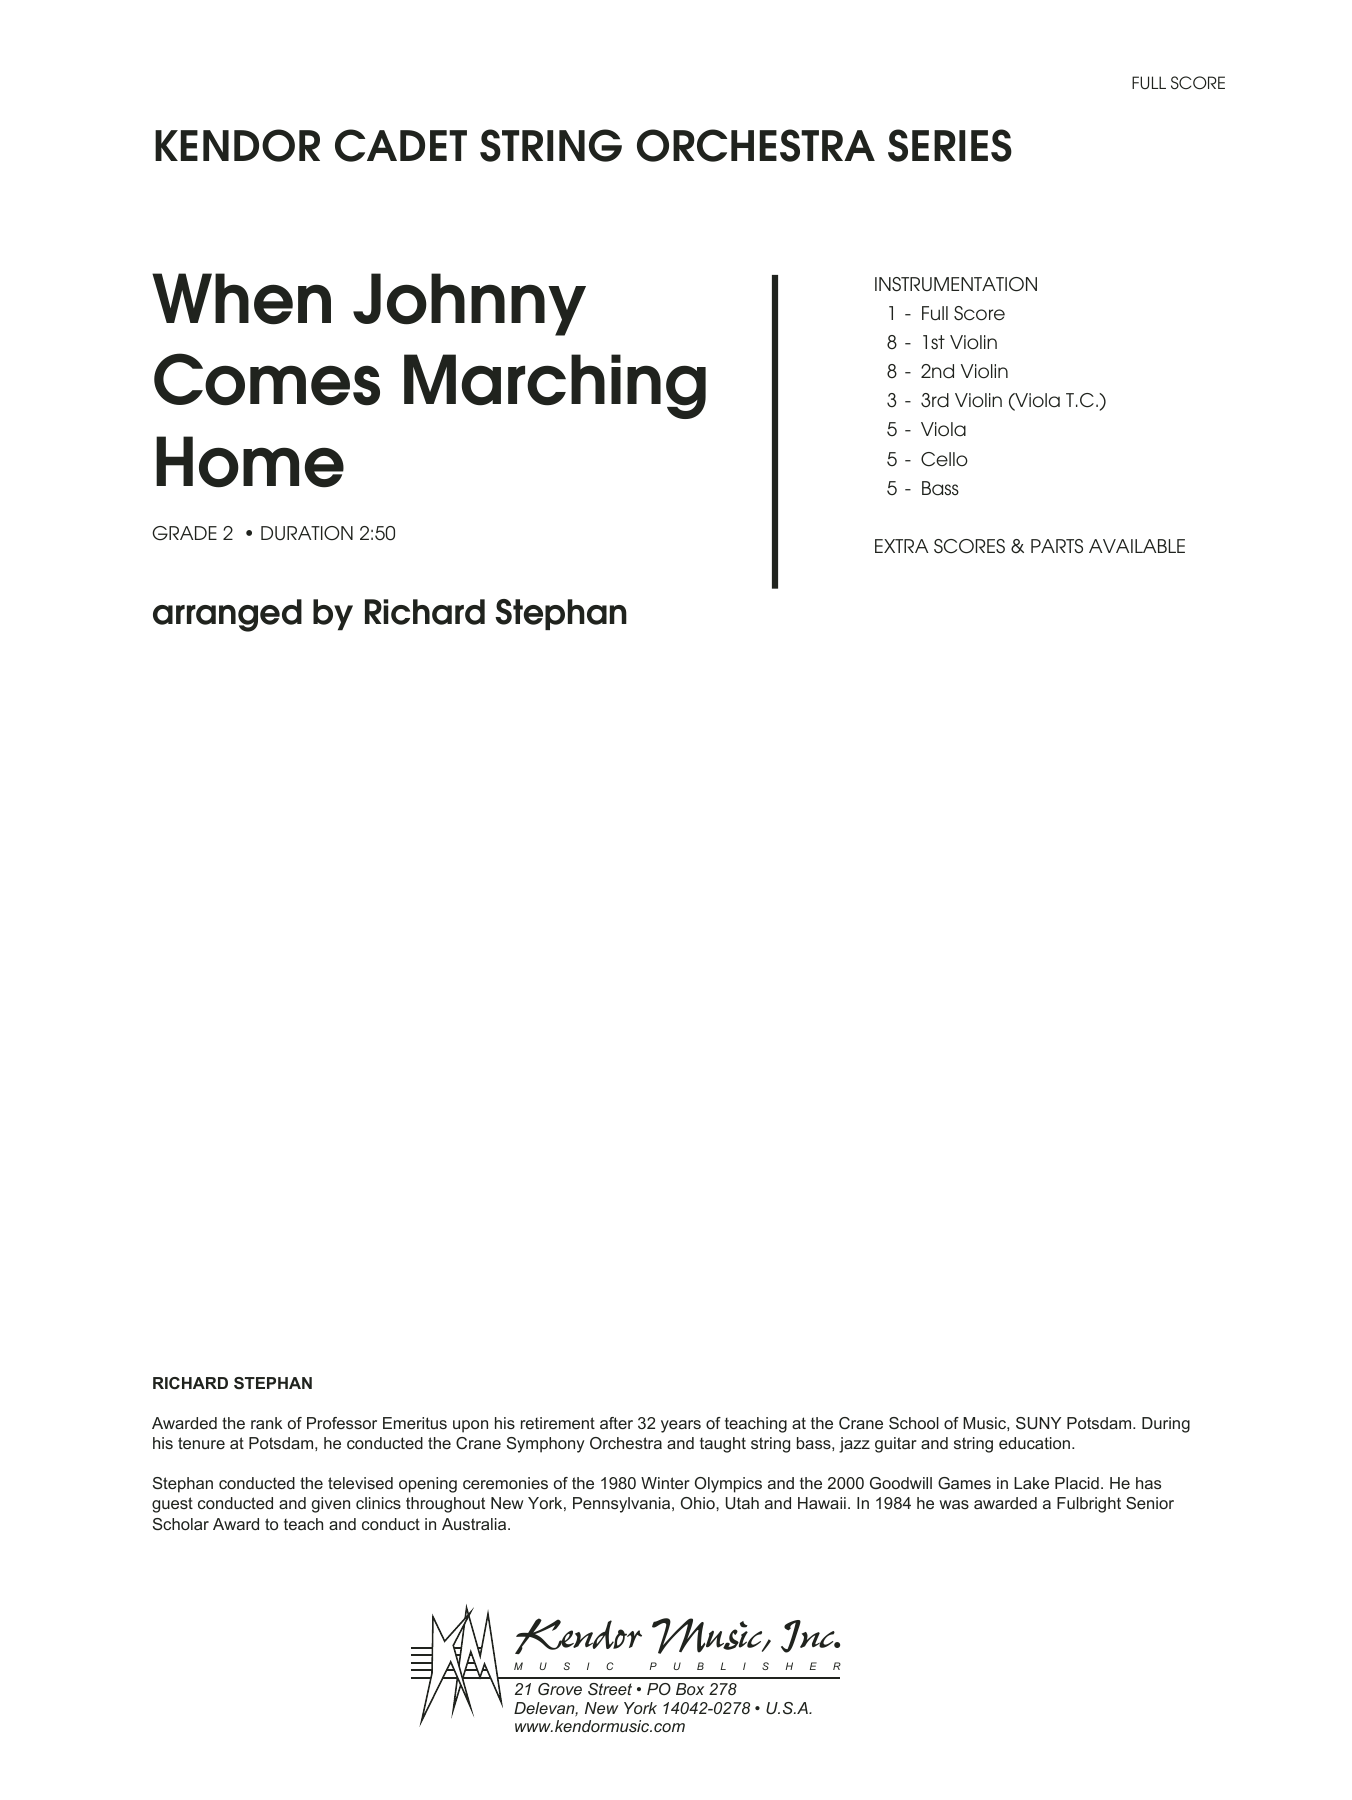 When Johnny Comes Marching Home - Full Score (Orchestra) von Richard Stephan